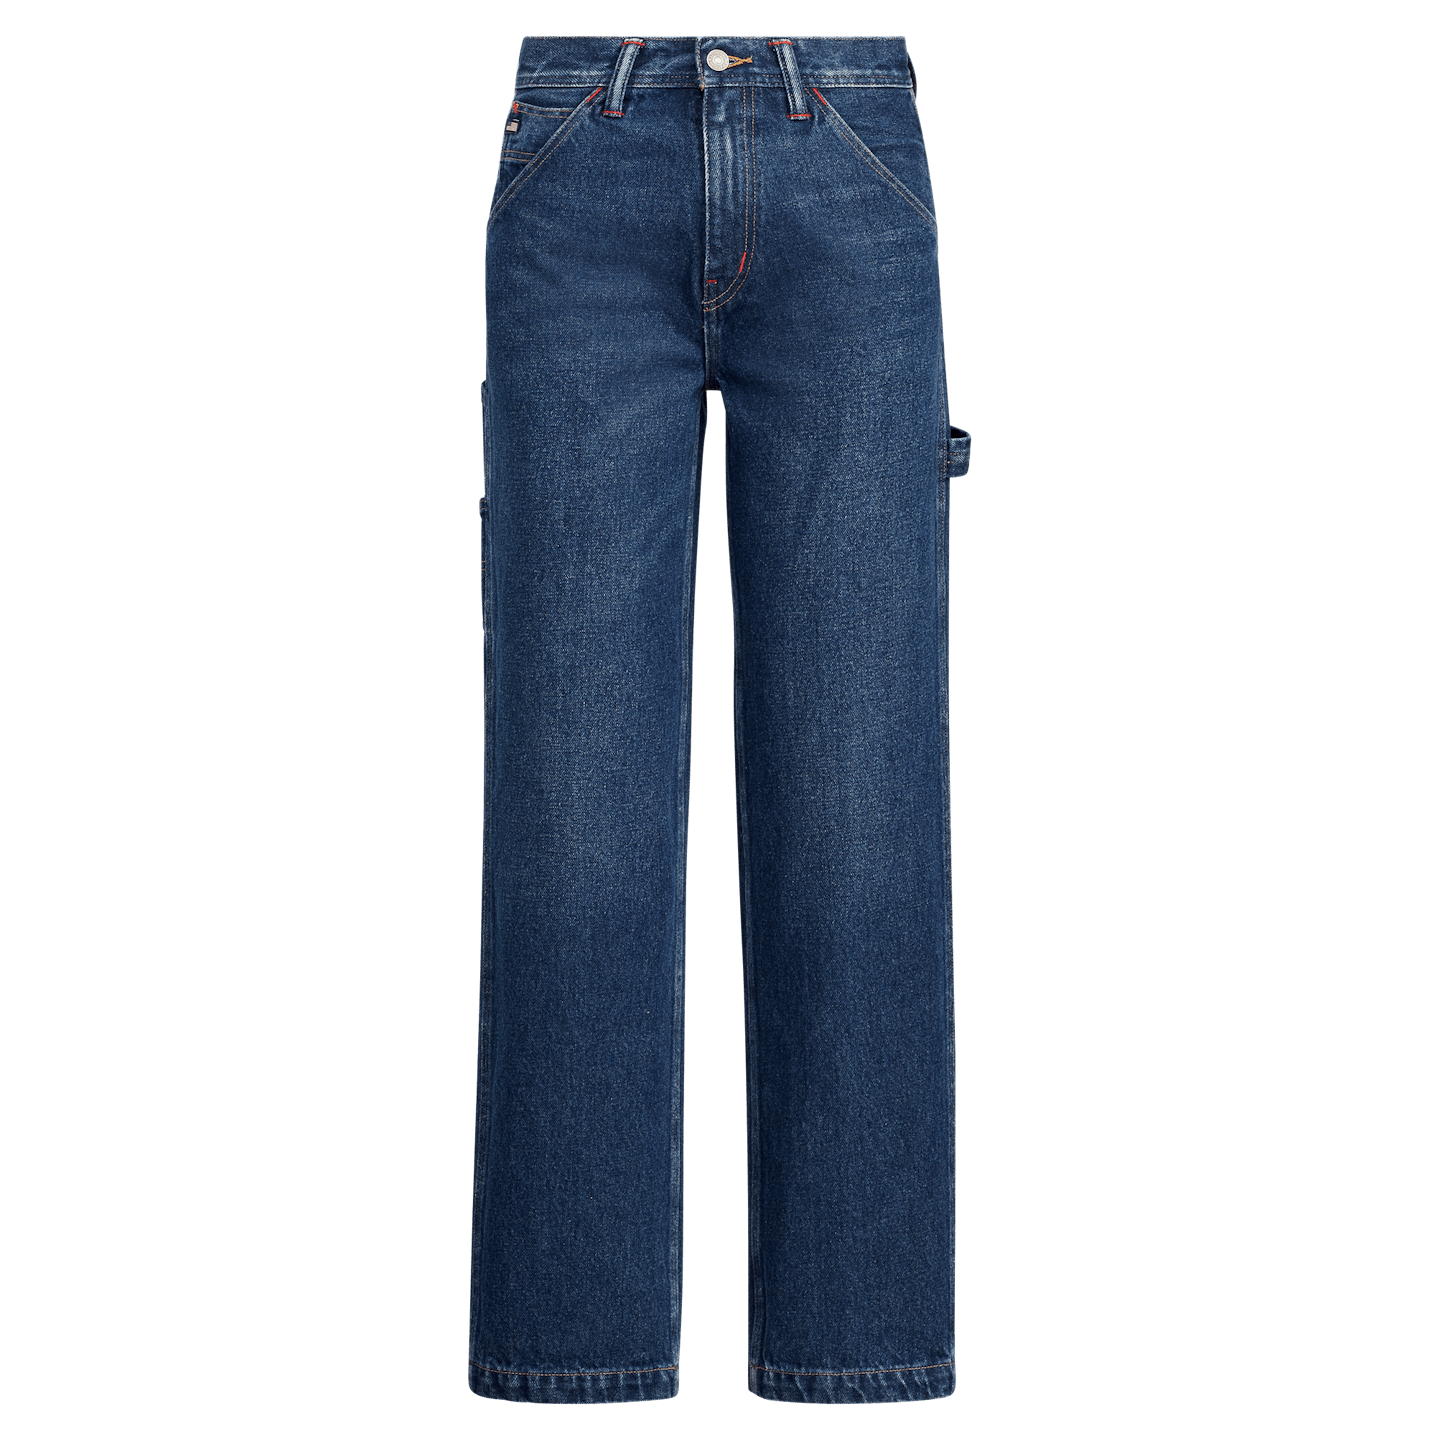 Polo Sport jeans